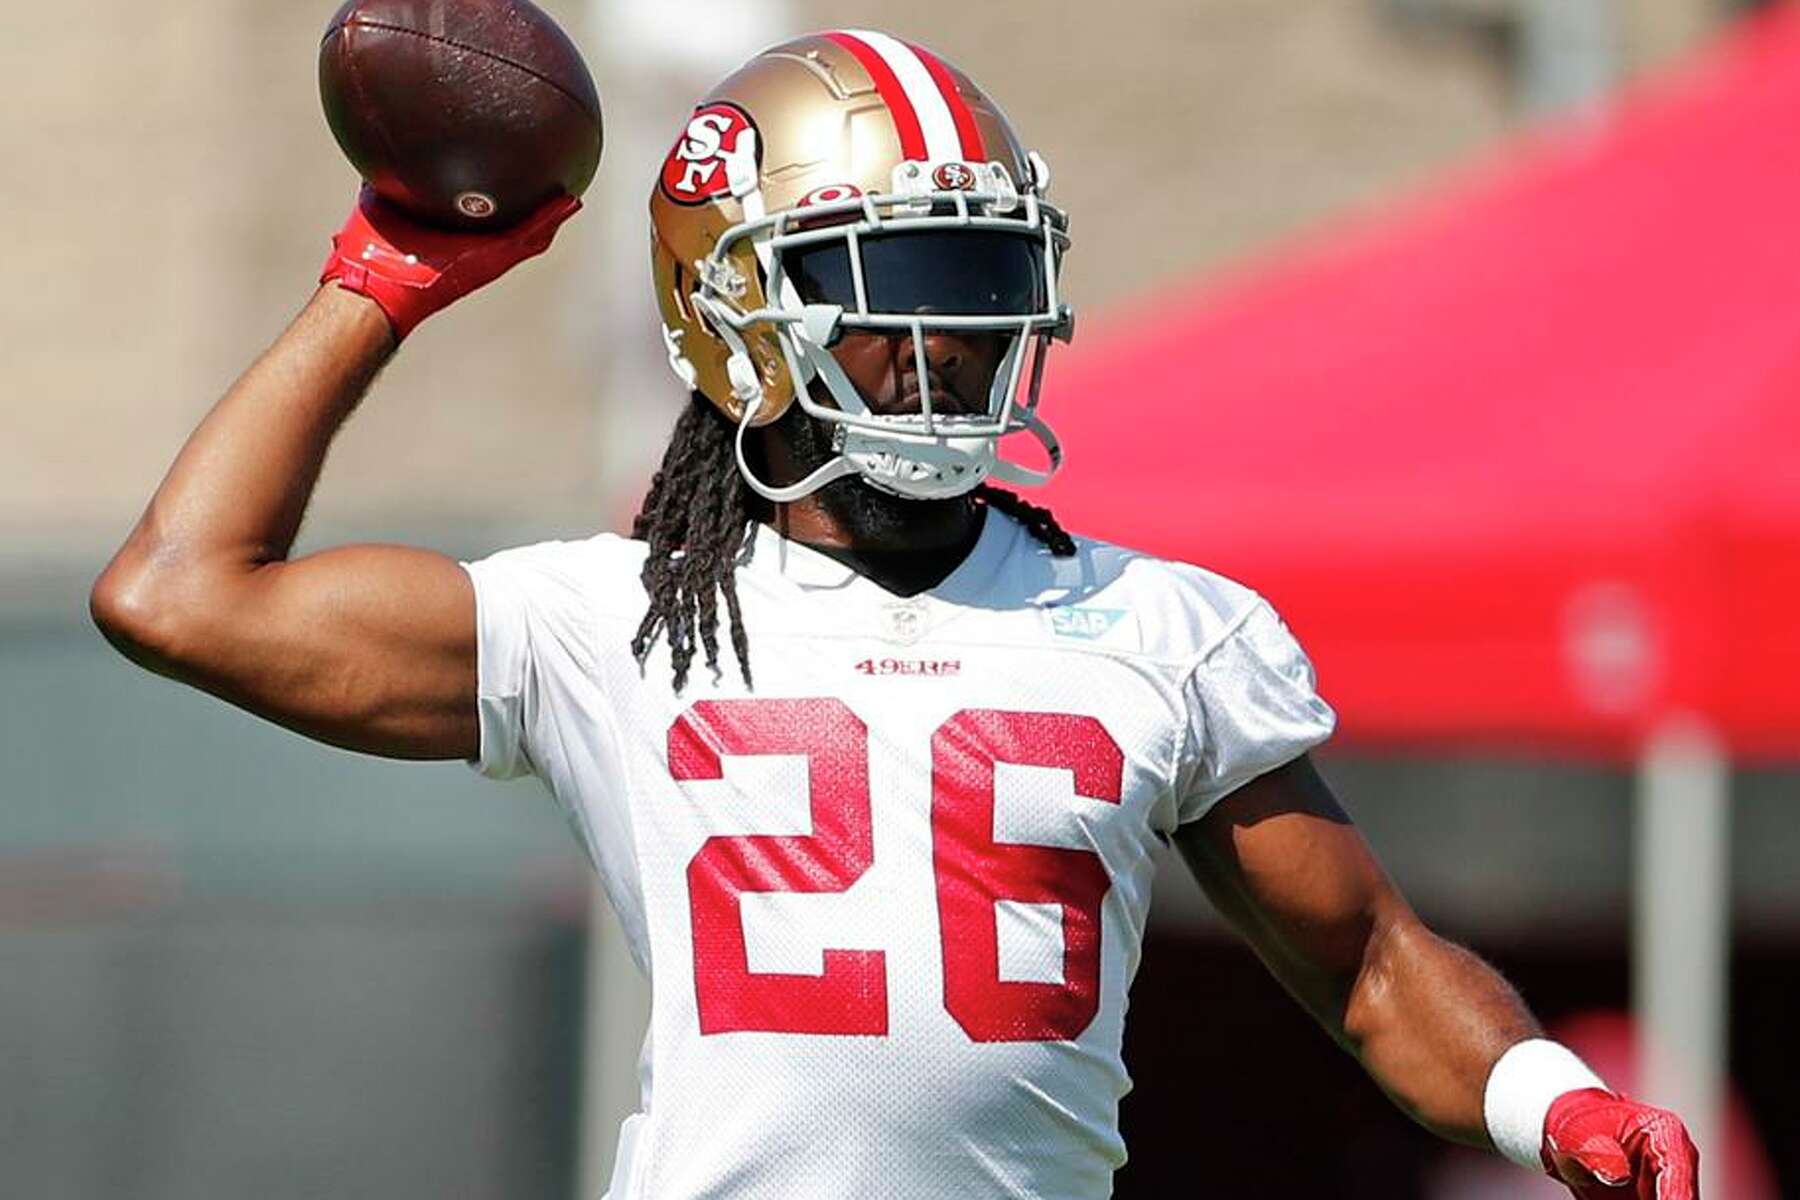 Josh Norman 49ers Oldest Defensive Player Insists Craftiness Can Carry Him